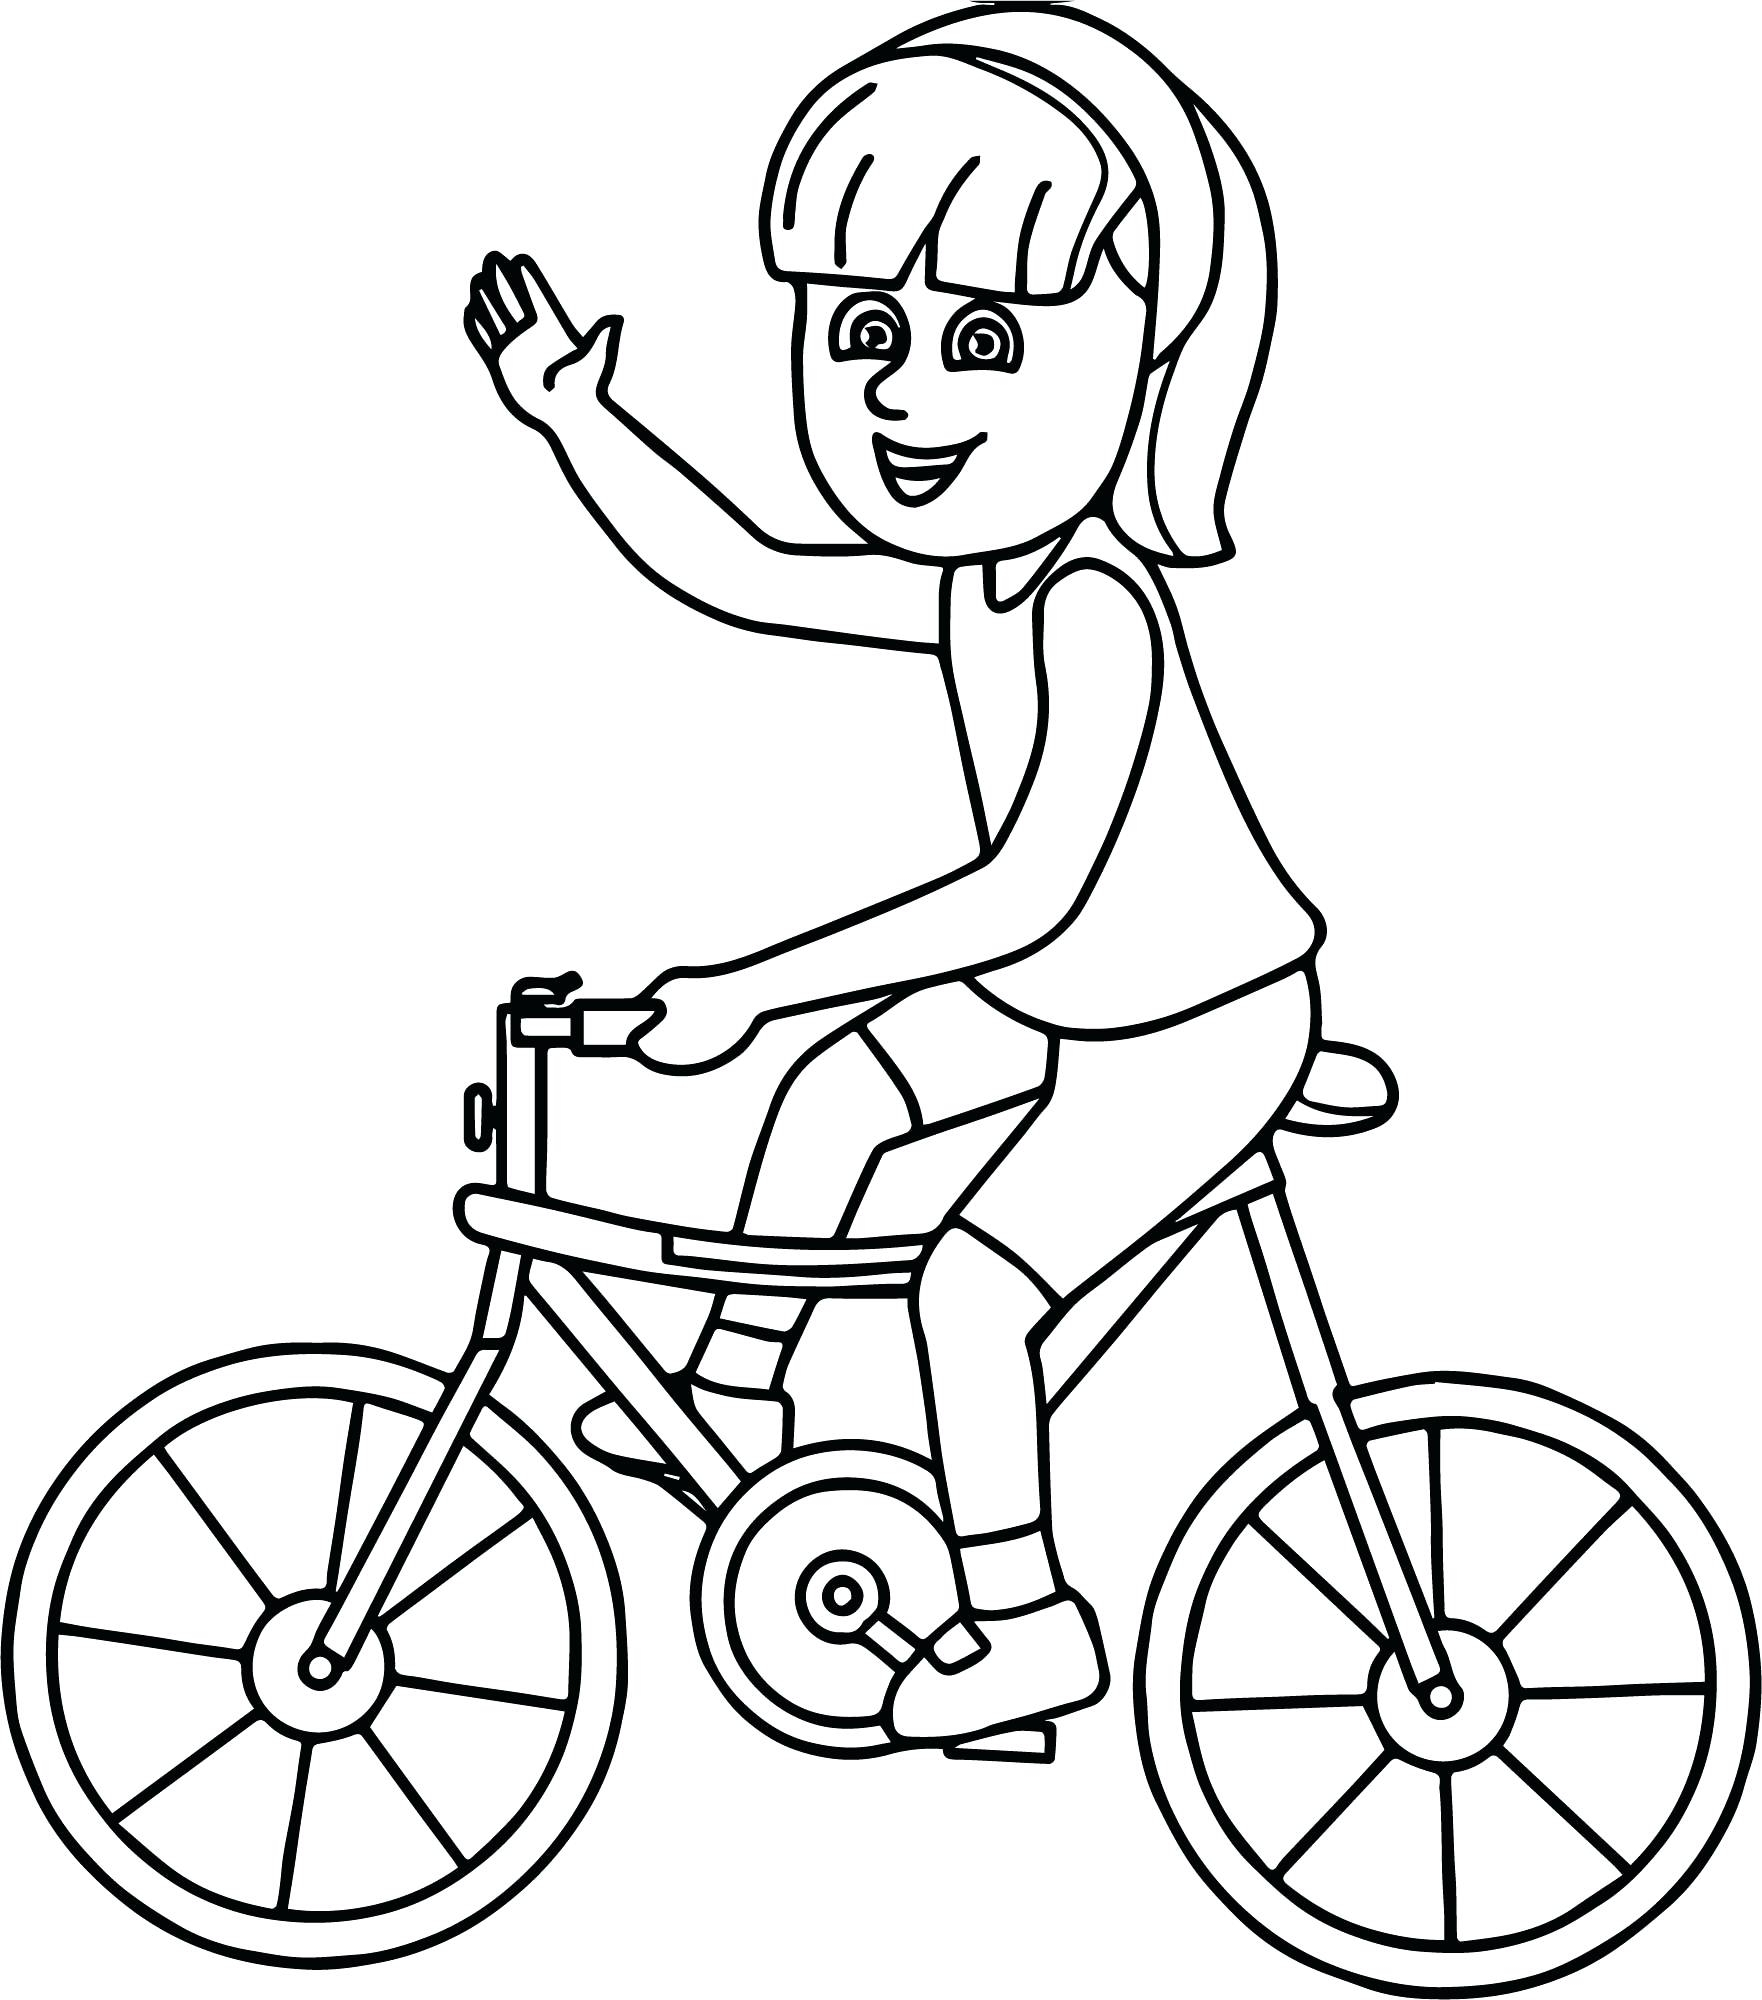 Bike Helmet Coloring Page Bicycle Coloring Page Aspiration Pages Vehicles Pictures Picture